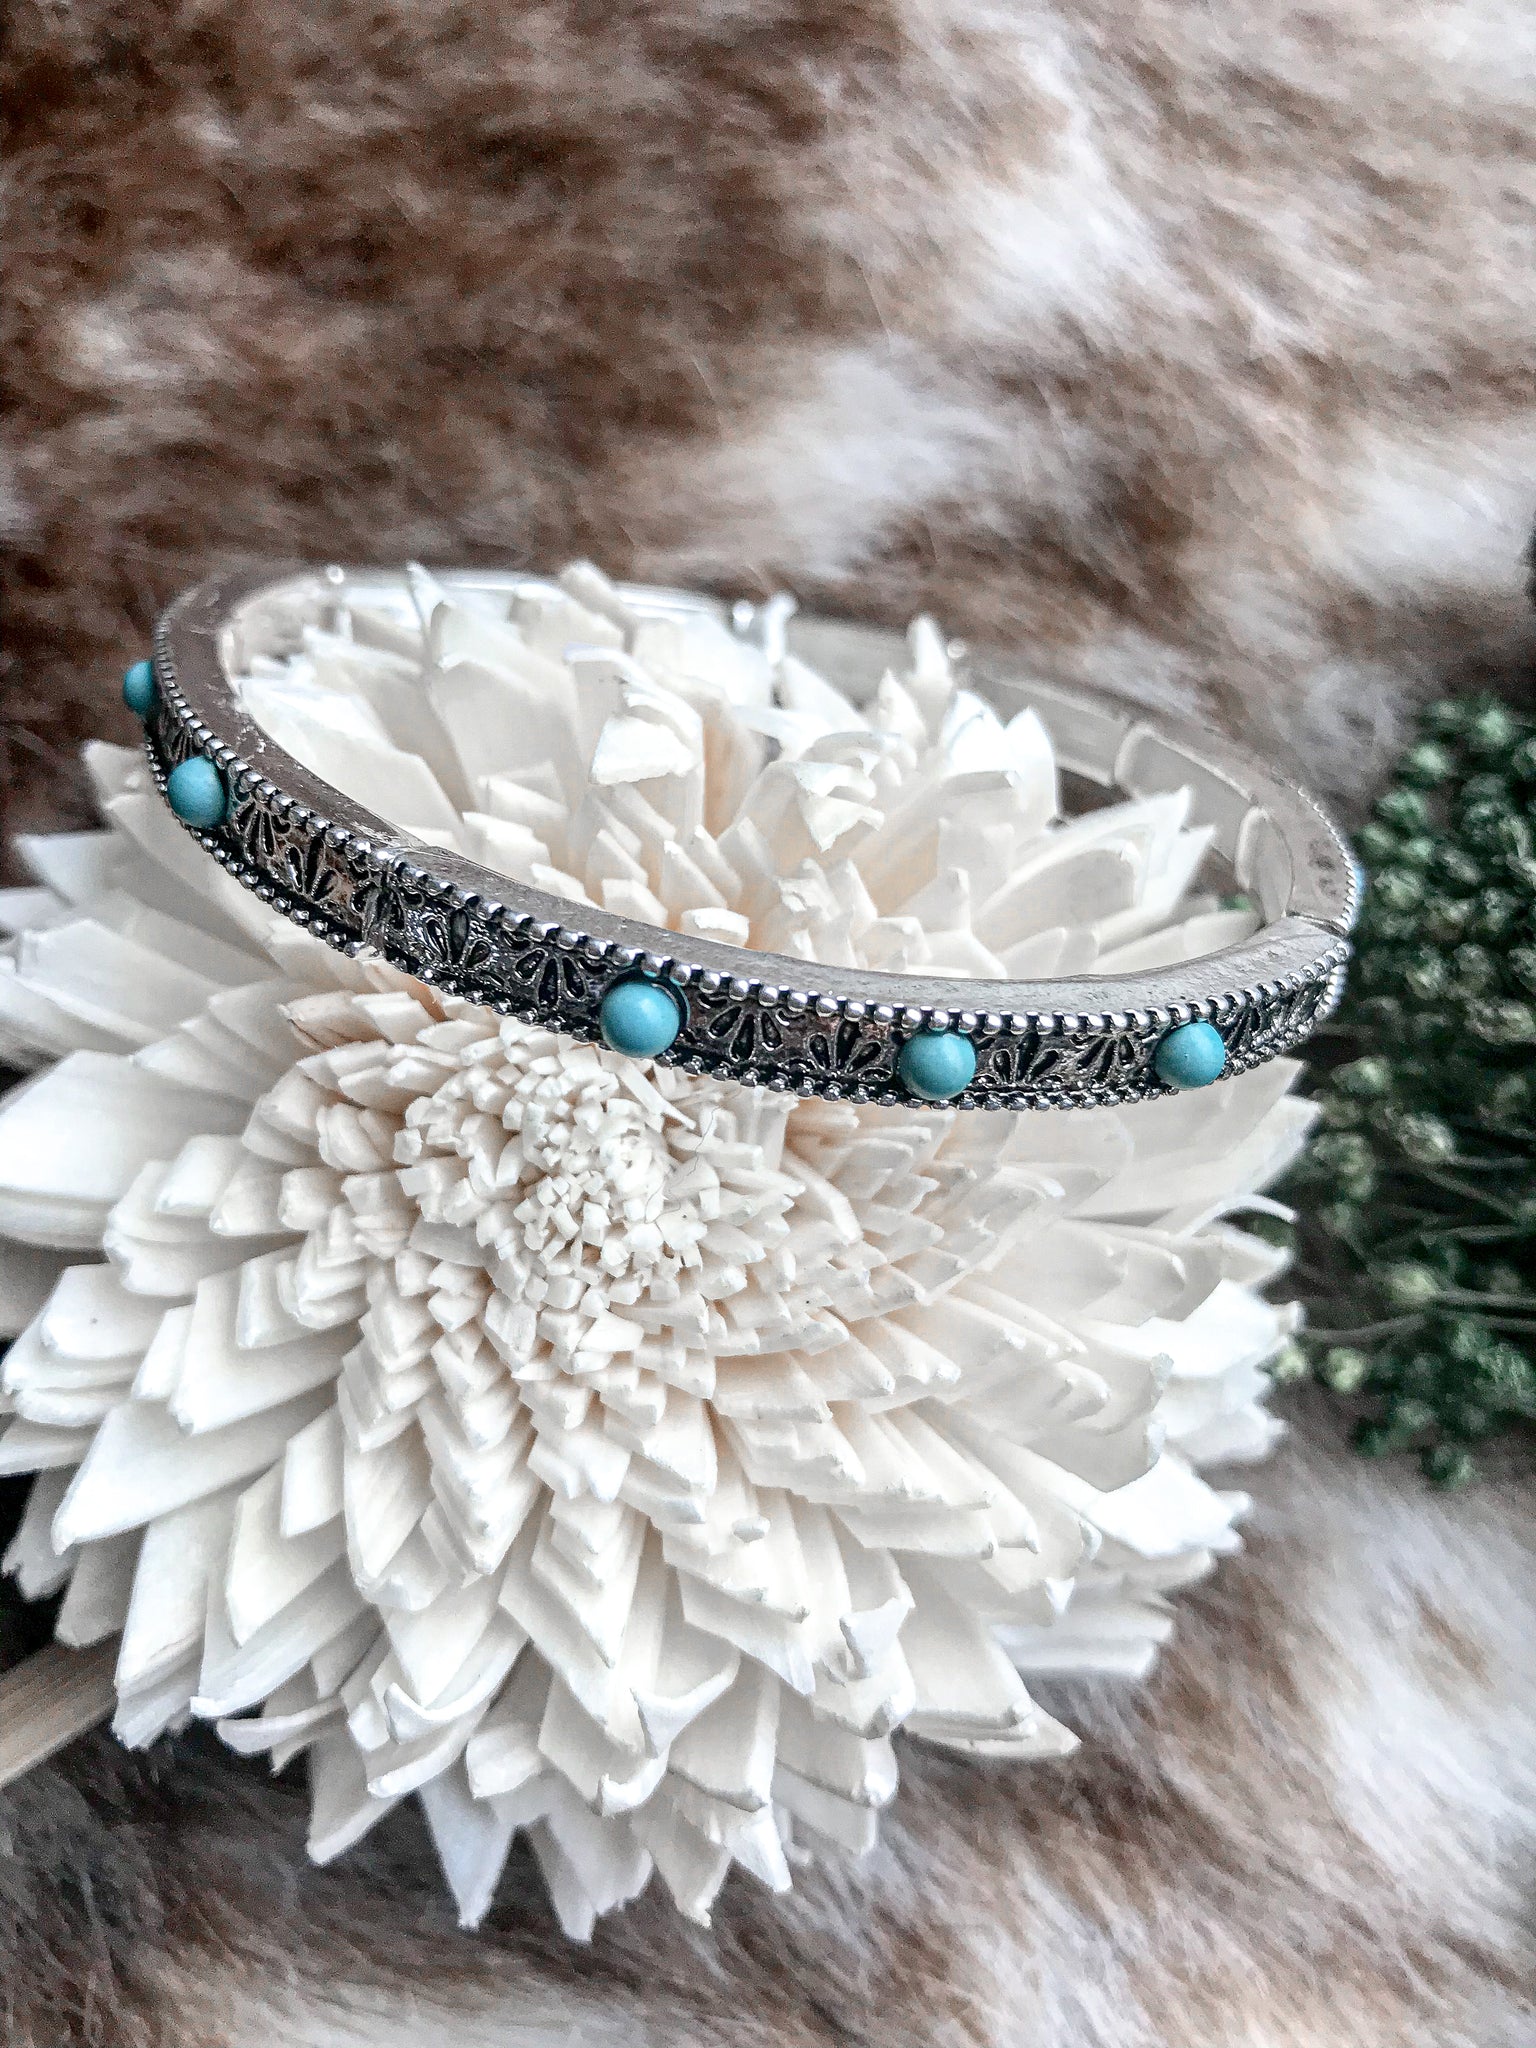 Turquoise And Silvertone Stretch Bracelet